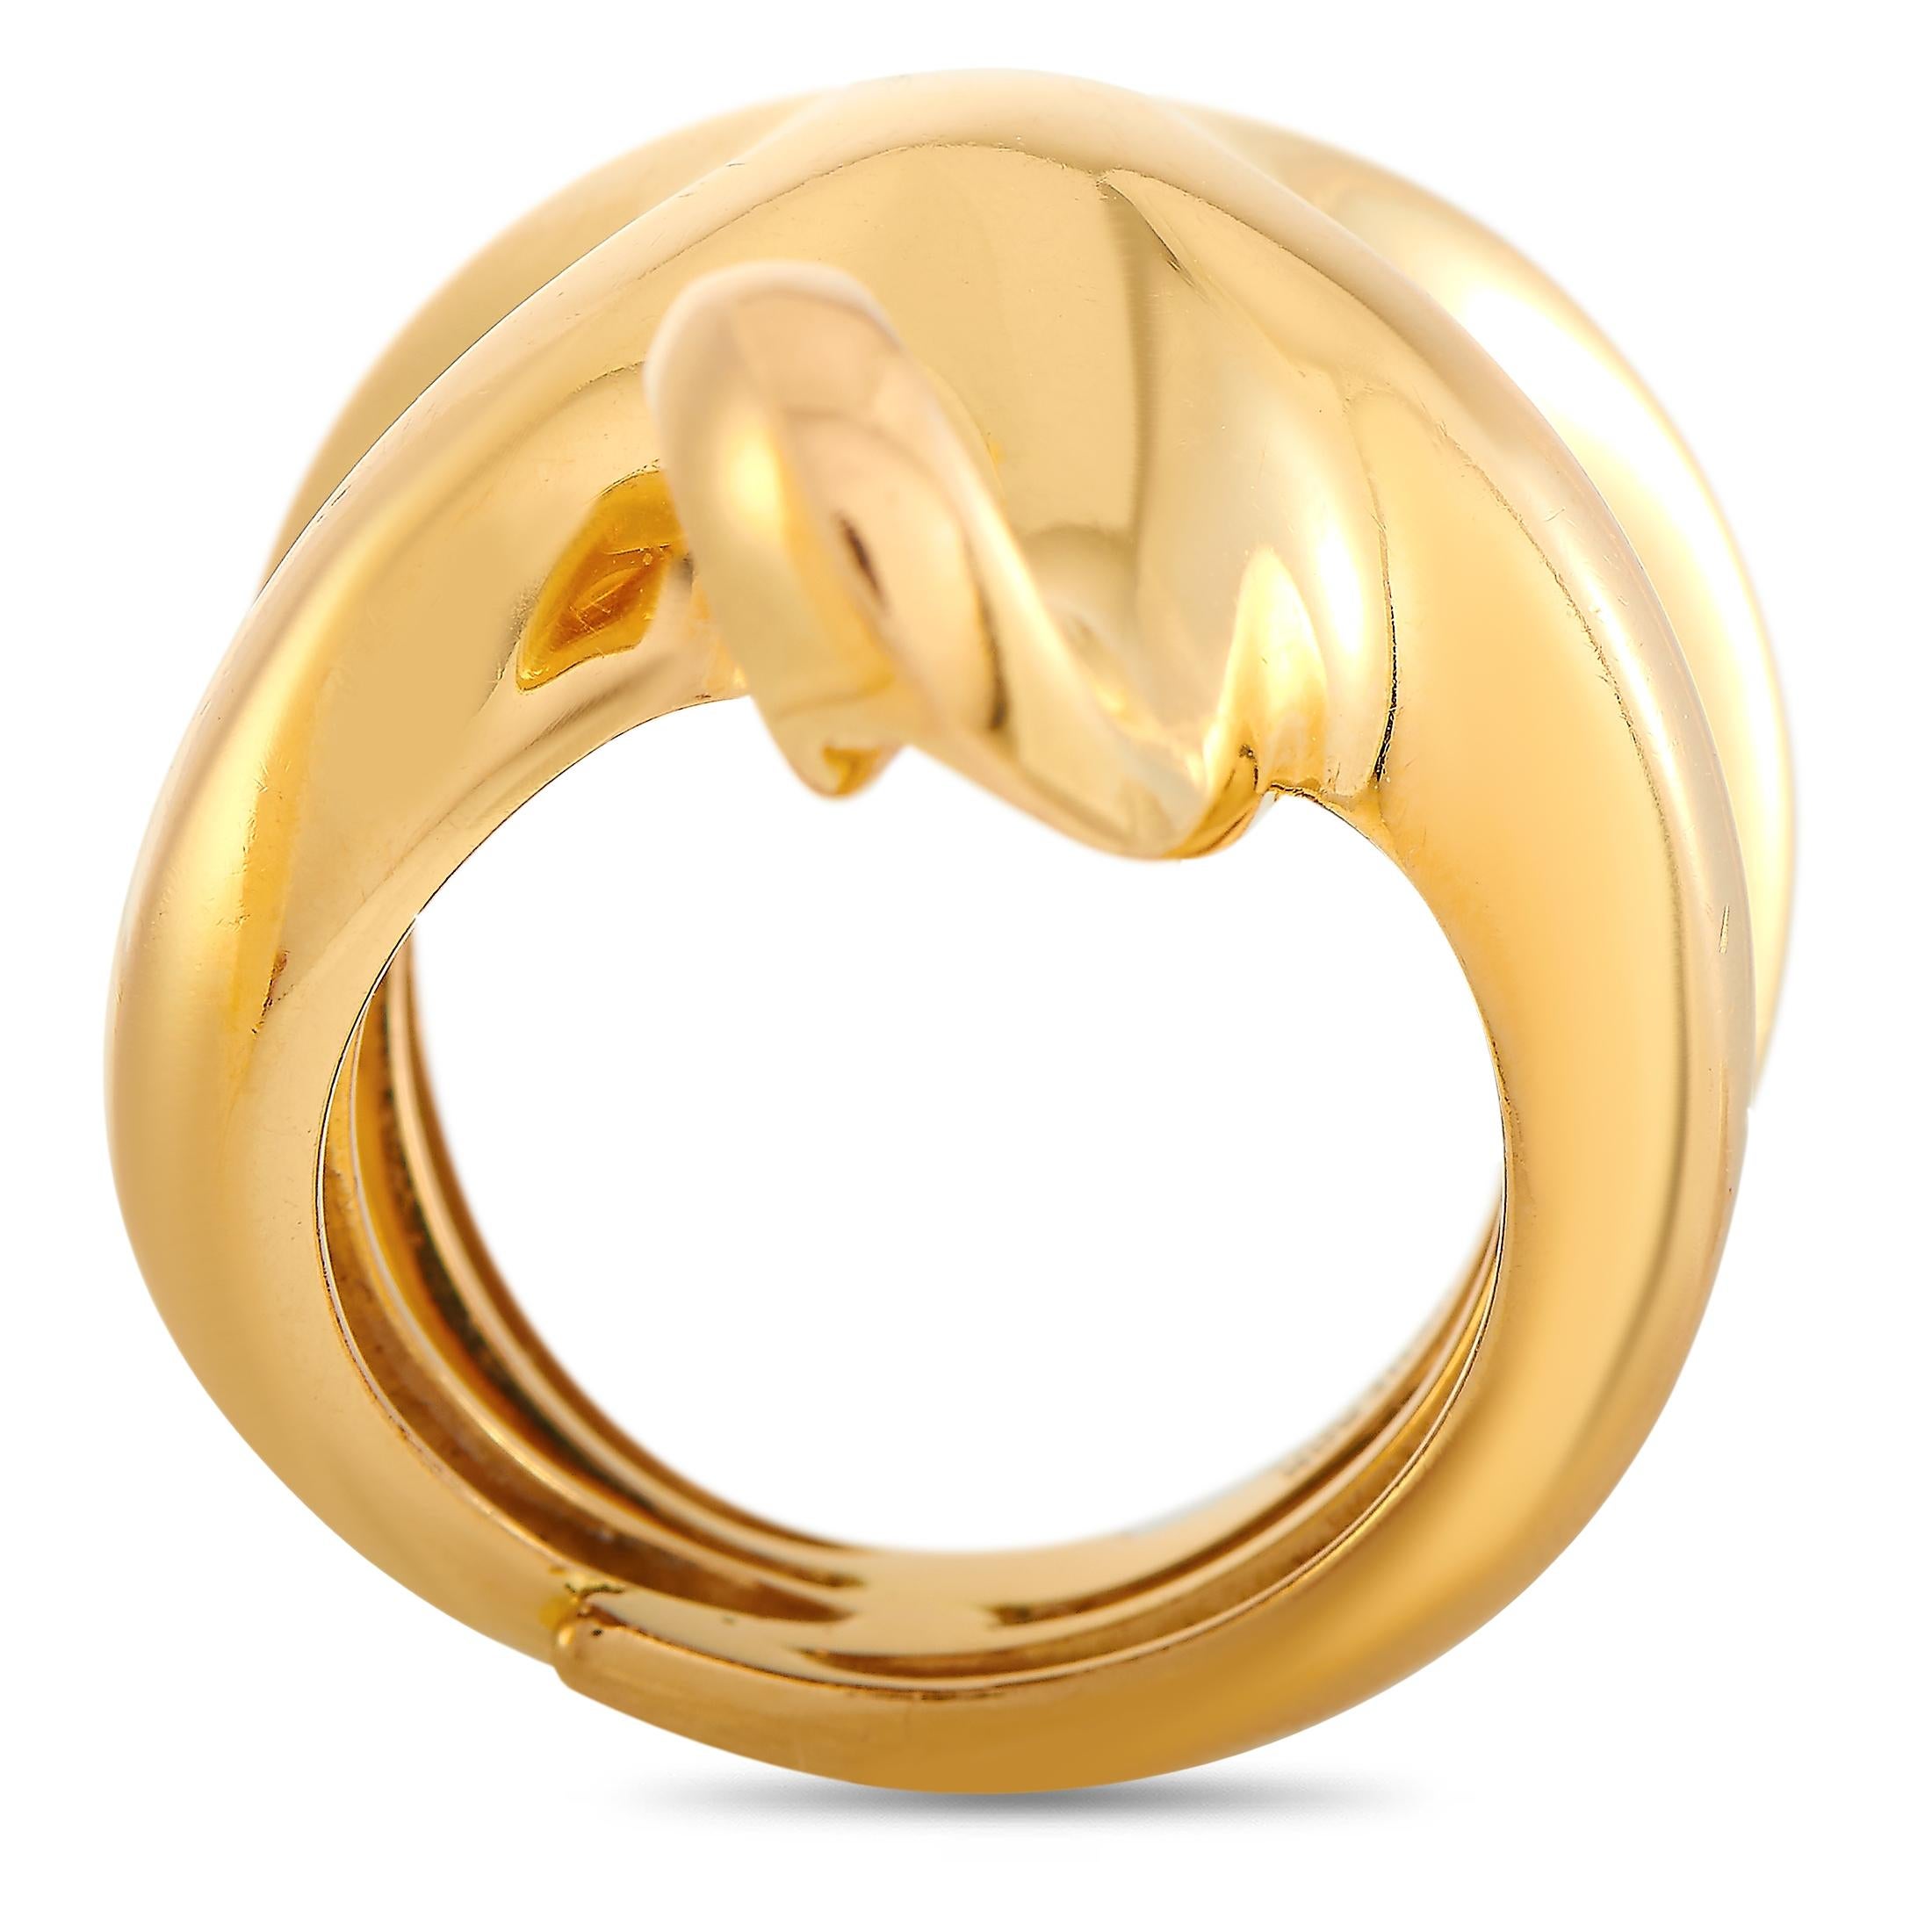 This Boucheron ring is crafted from 18K yellow gold and weighs 17.5 grams. The ring boasts band thickness of 8 mm and top height of 15 mm, while top dimensions measure 25 by 15 mm.
 
 Offered in estate condition, this jewelry piece includes the